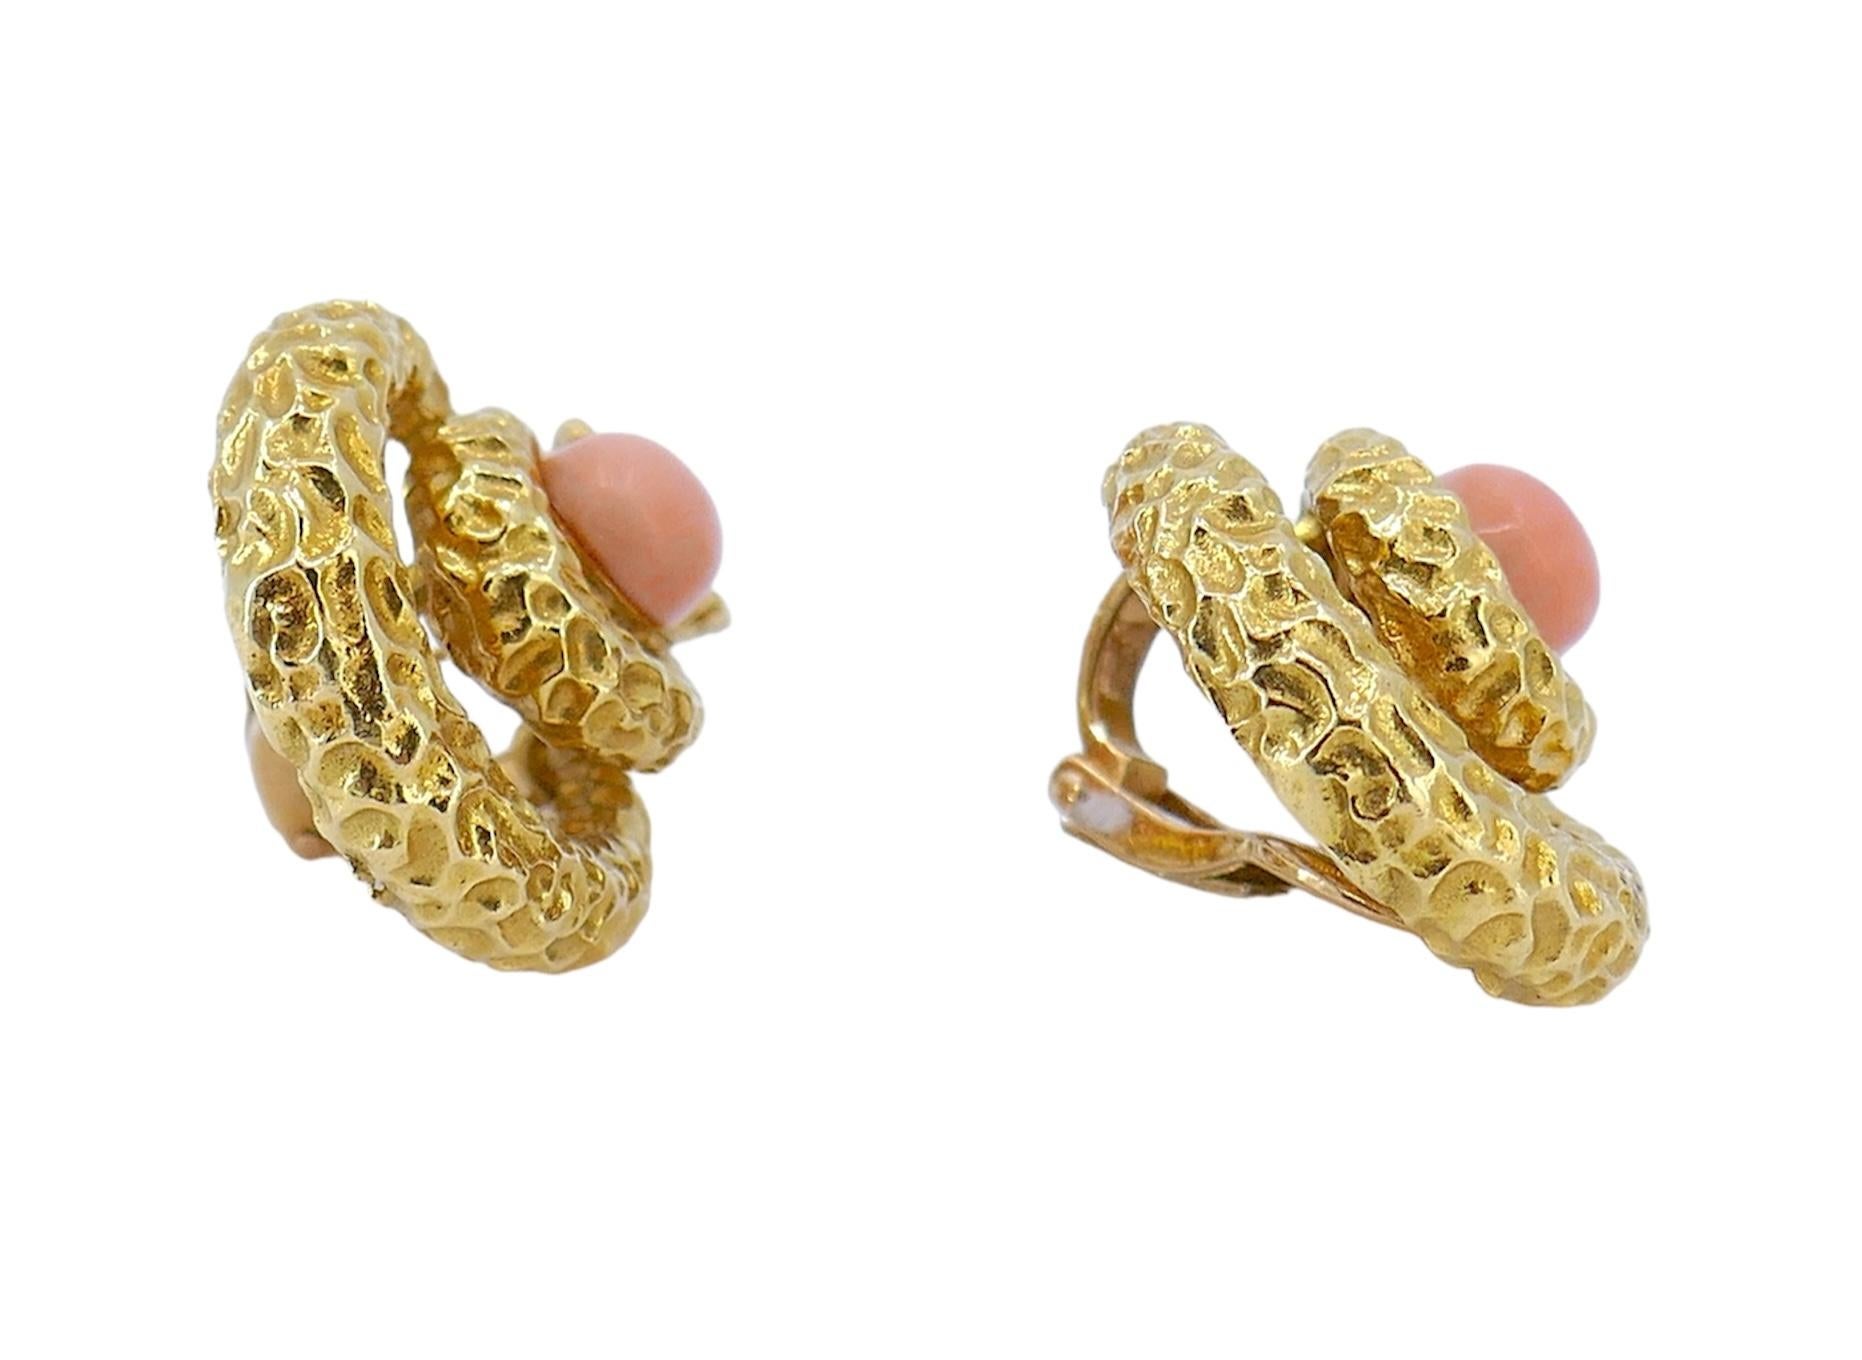 Mauboussin Paris 18k Hammered Gold Diamond Coral Earrings For Sale 3